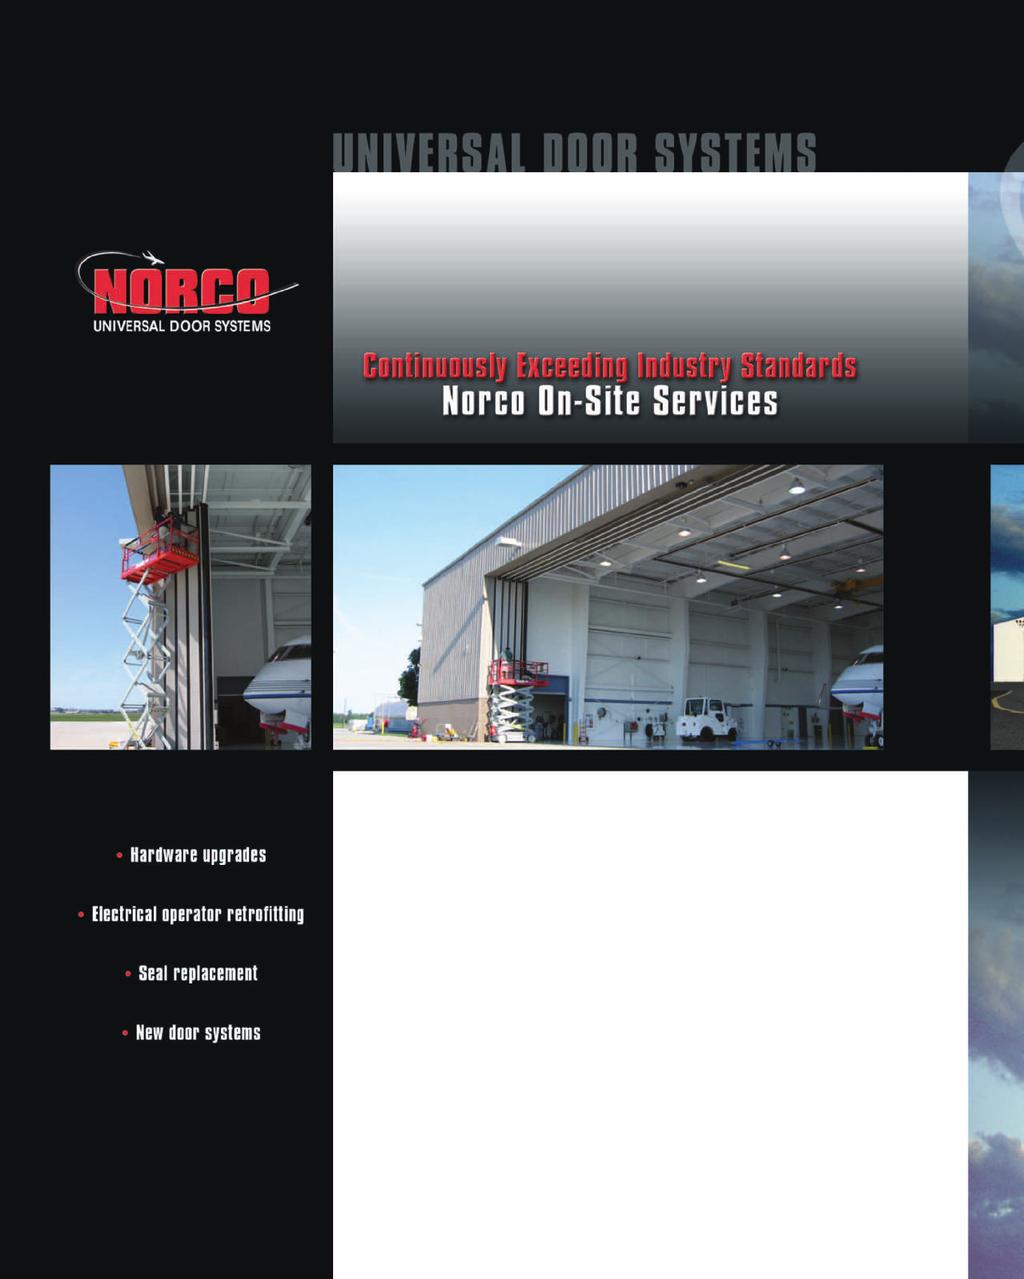 With over 45 years of experience in the hangar door industry Norco has the expertise to assist you with even the most challenging installation requirements.